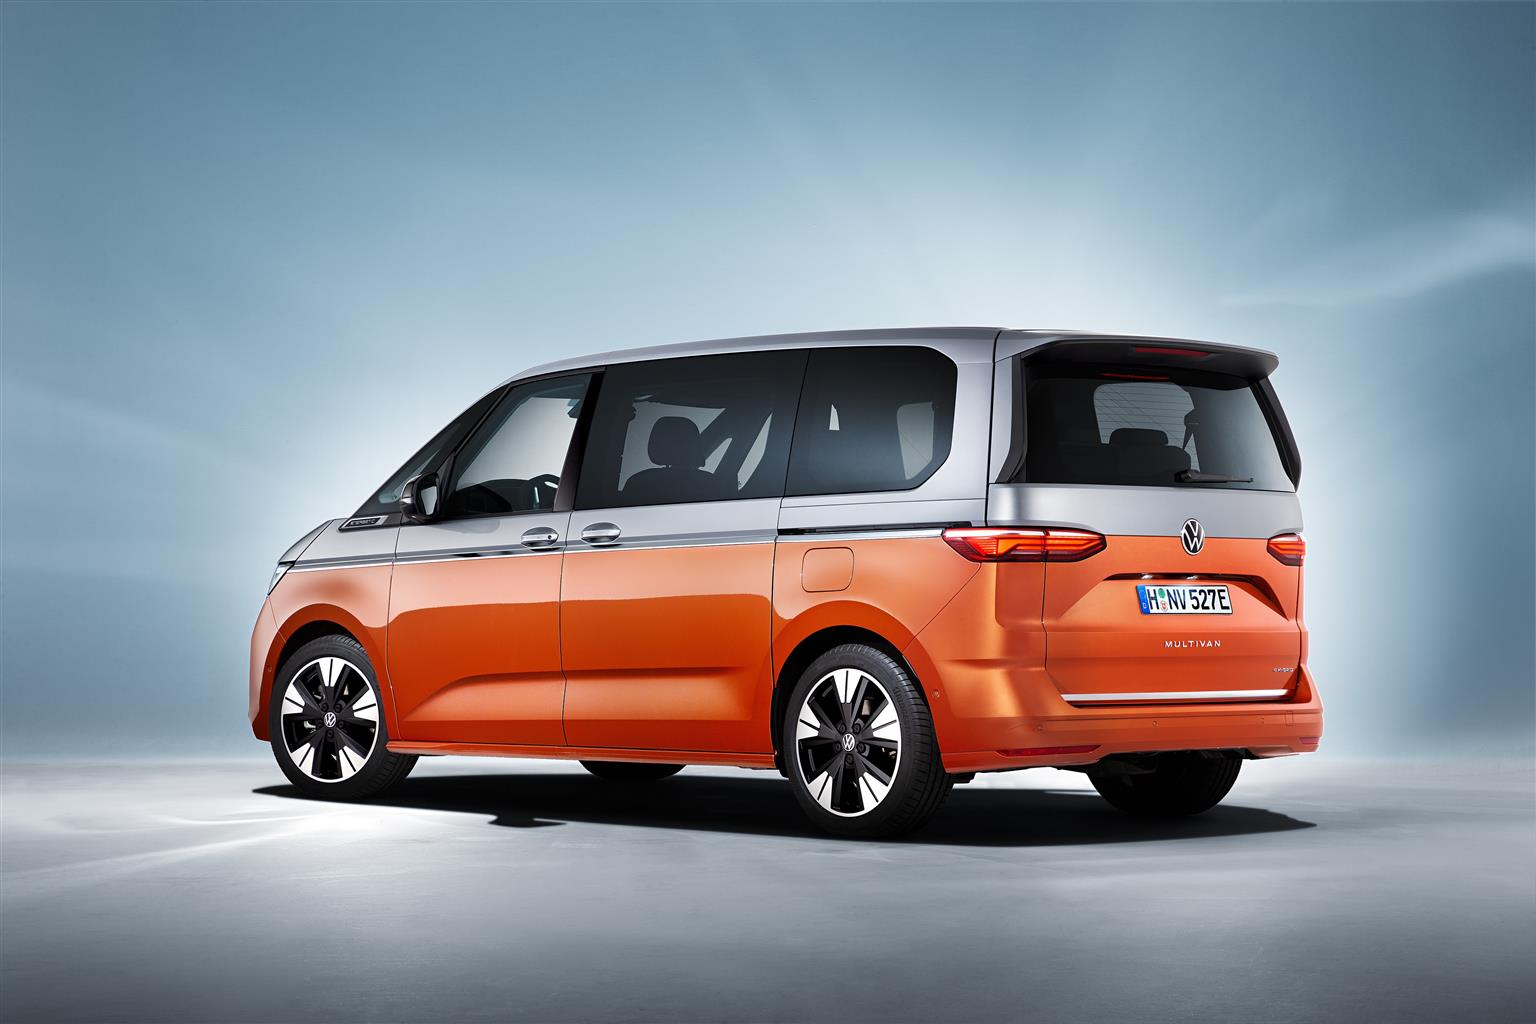 The new Volkswagen Multivan T7 has a plugin hybrid drive system